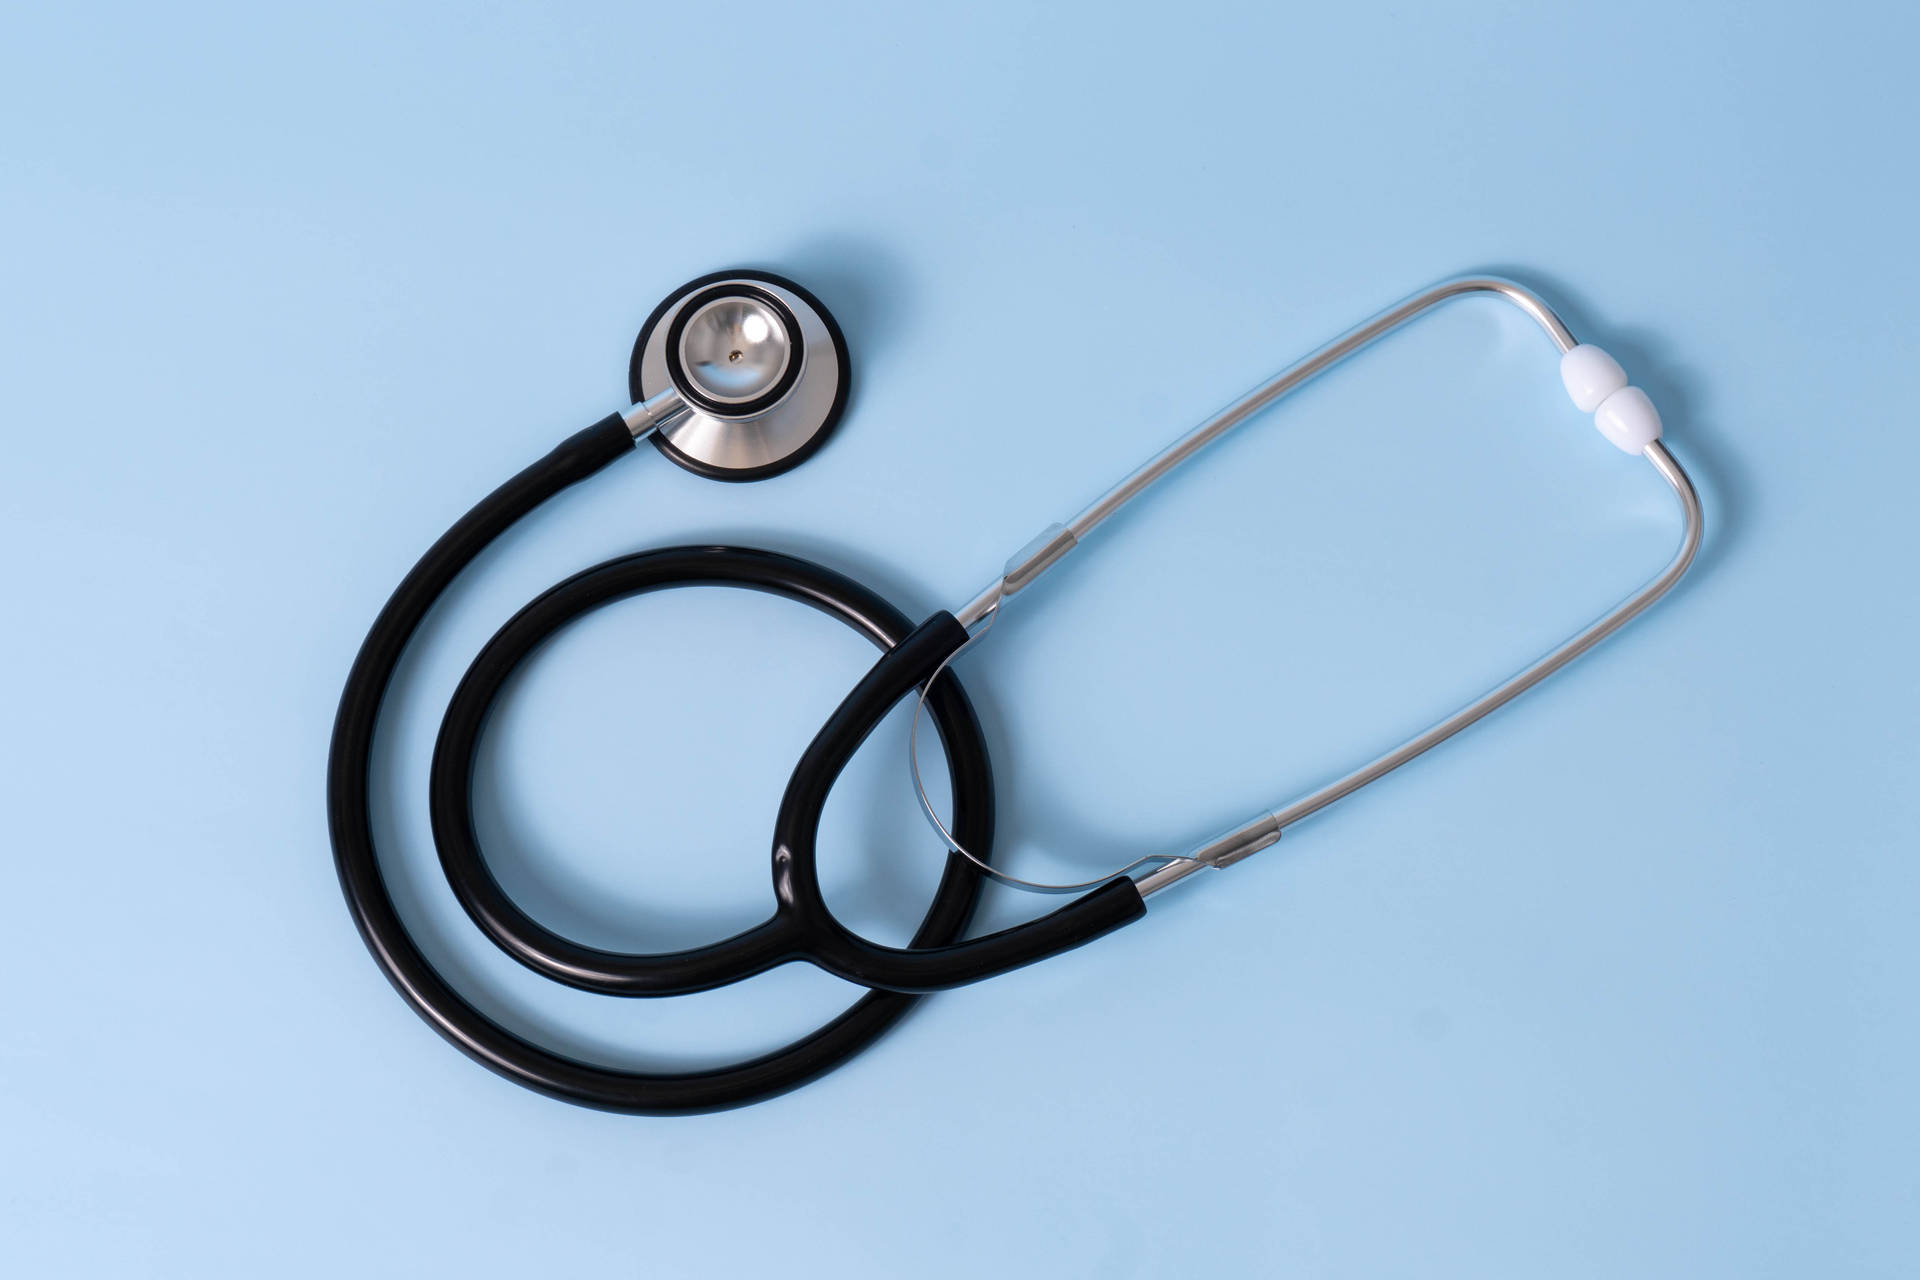 Black Stethoscope On A Blue Surface Wallpaper